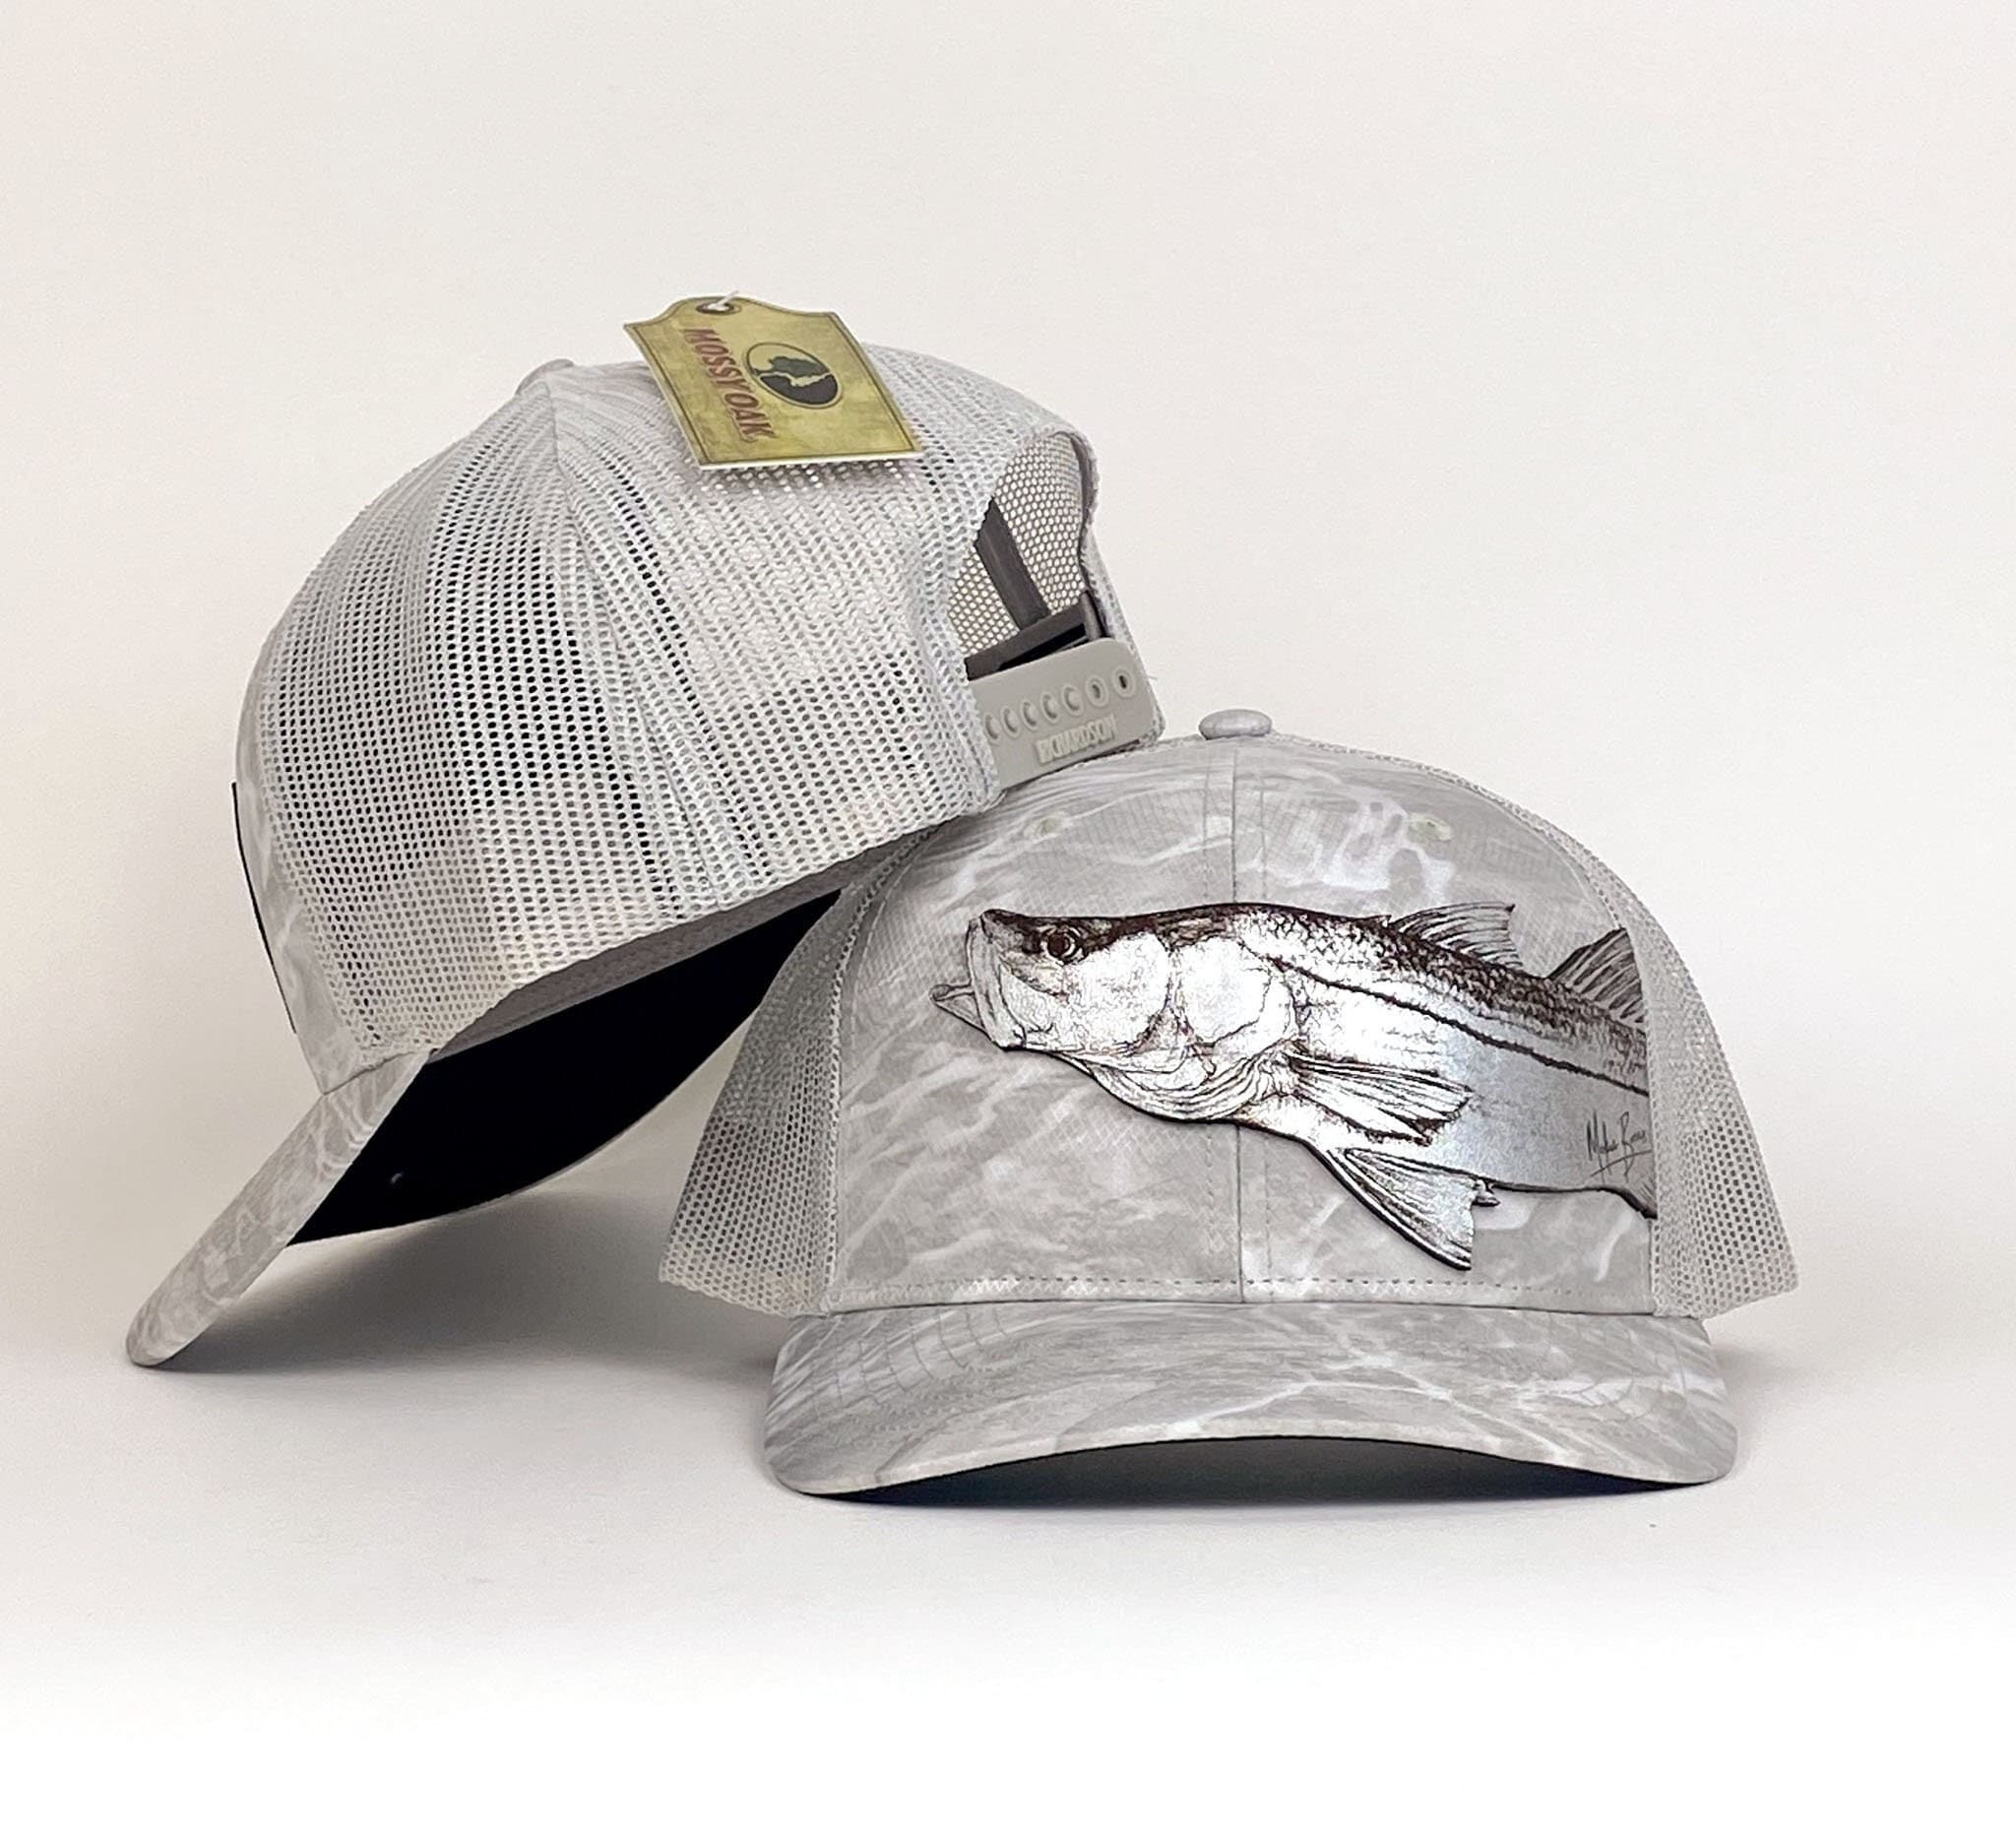 Multicam Leather patch snook fishing hat